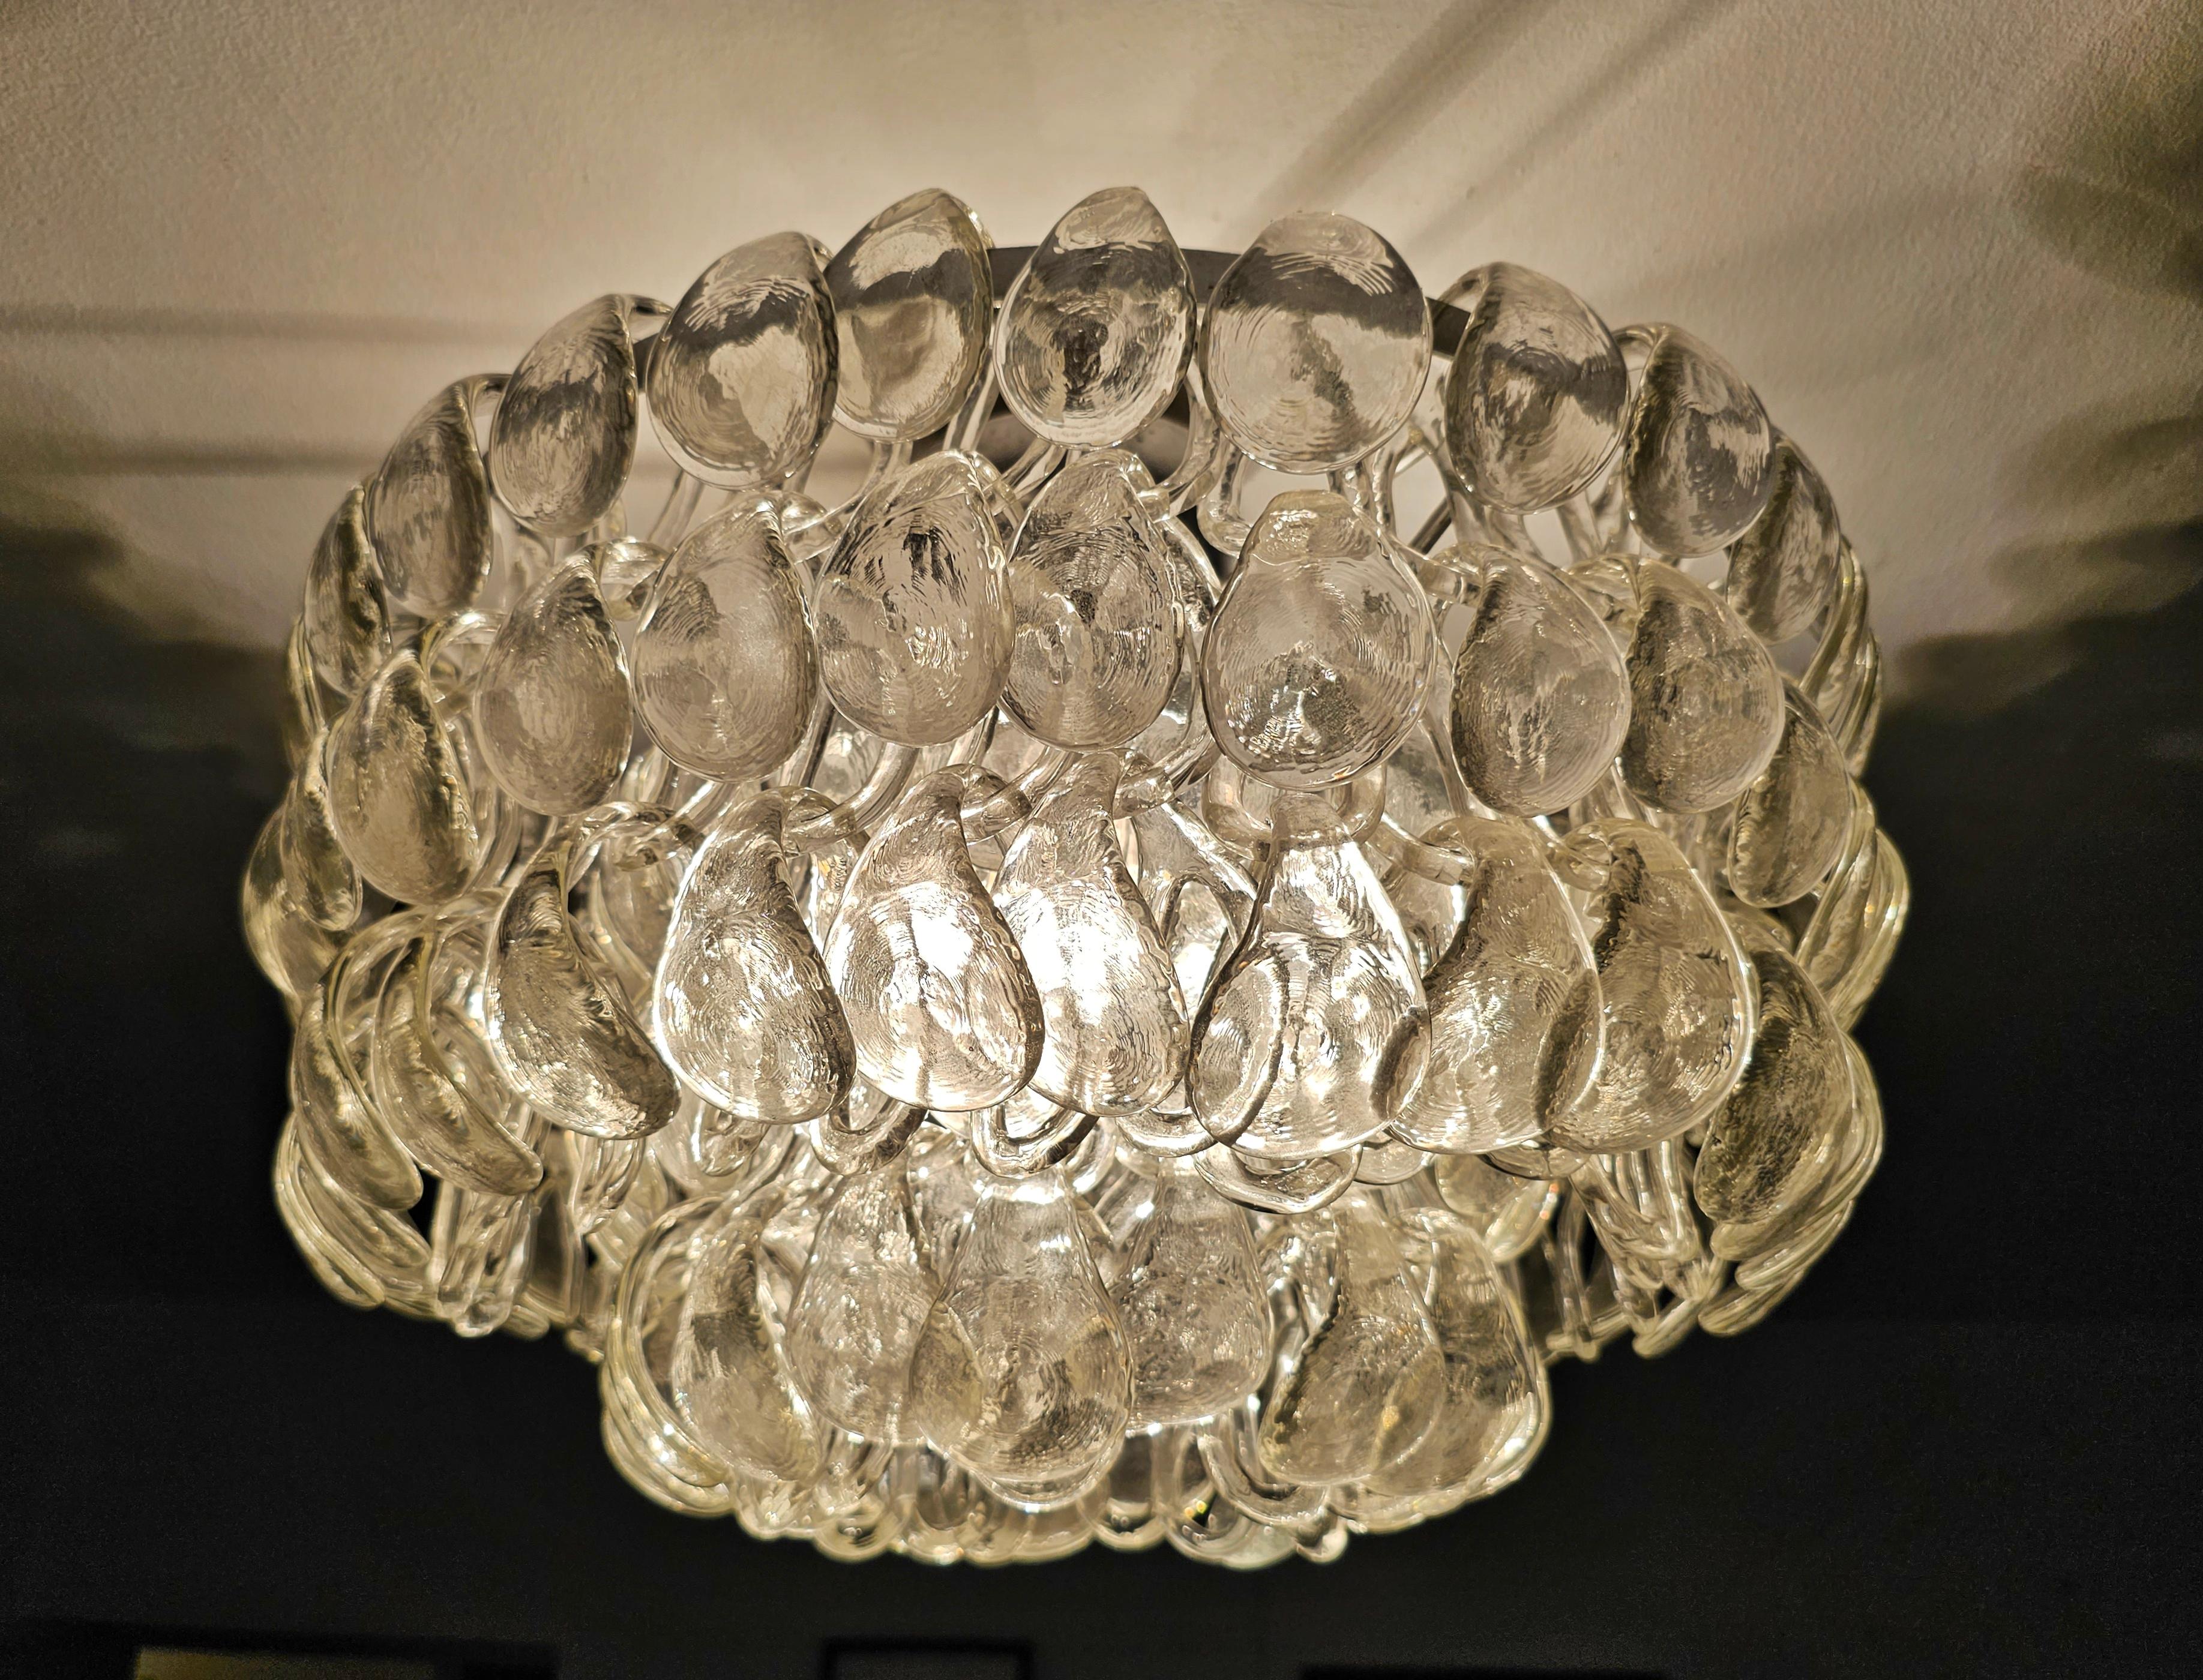 In this listing you will find a Mid Century Modern 2-tier Flush Mount called Giogali designed by Angelo Mangiarotti for Vistosi. The flush mount consist of a large number of Murano glass rings that attach one to another in the row of three, creating